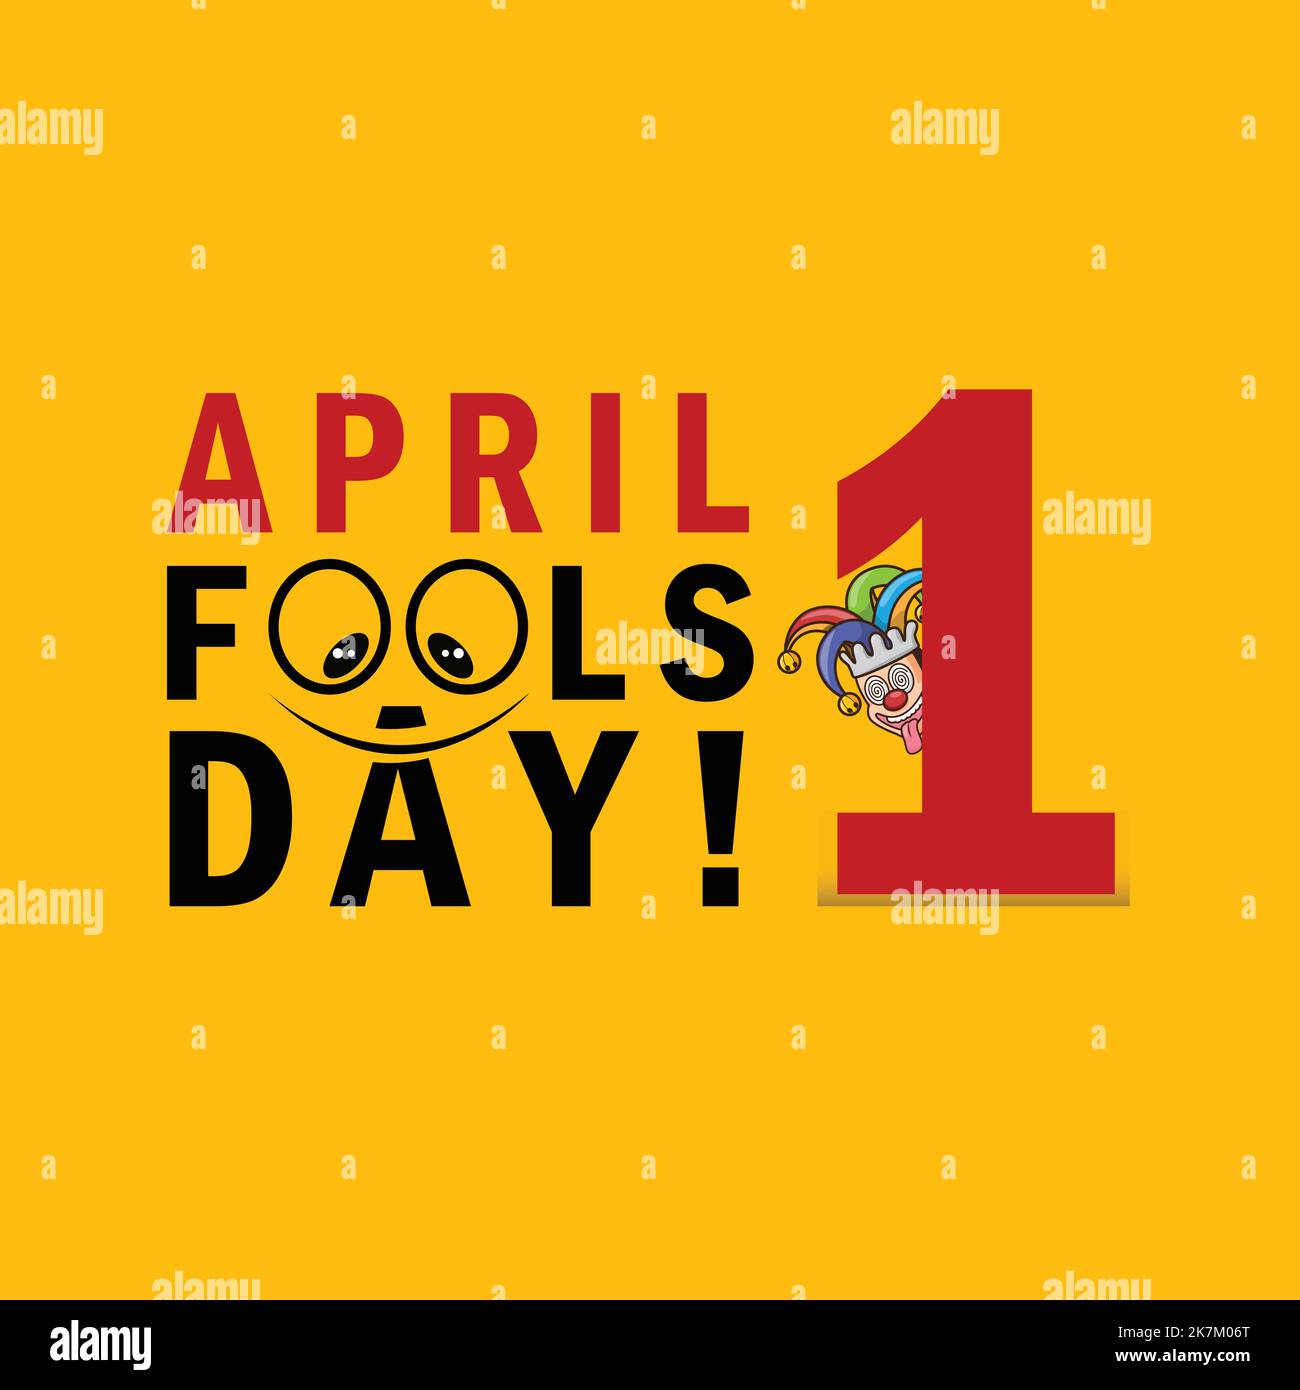 1 April fools day creative vector illustration, typography with funny character. Stock Vector